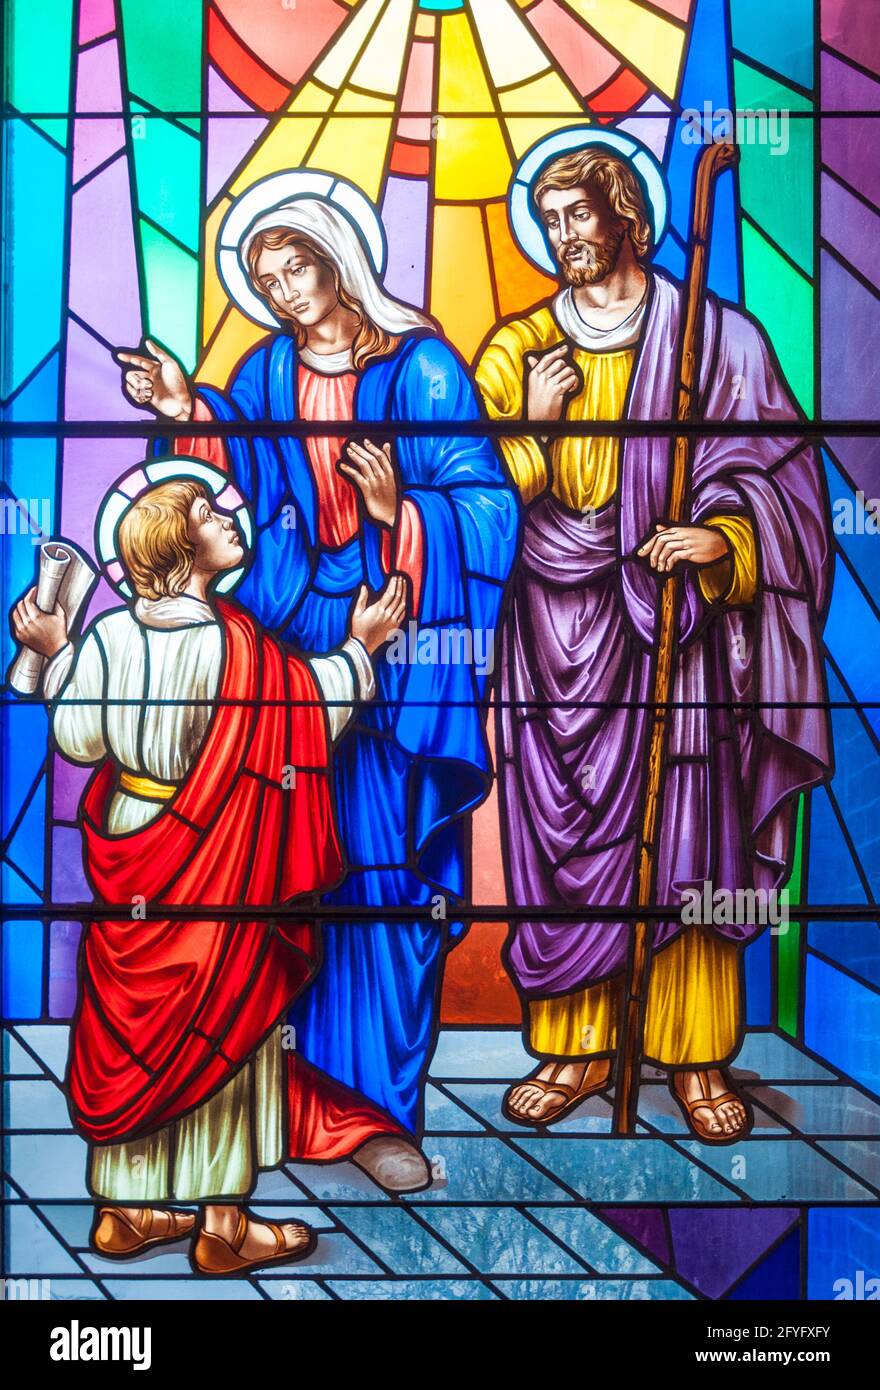 Christian scenes in stained glass following the catholic traditions, beautiful multicolor stained glass in Catholic church Stock Photo